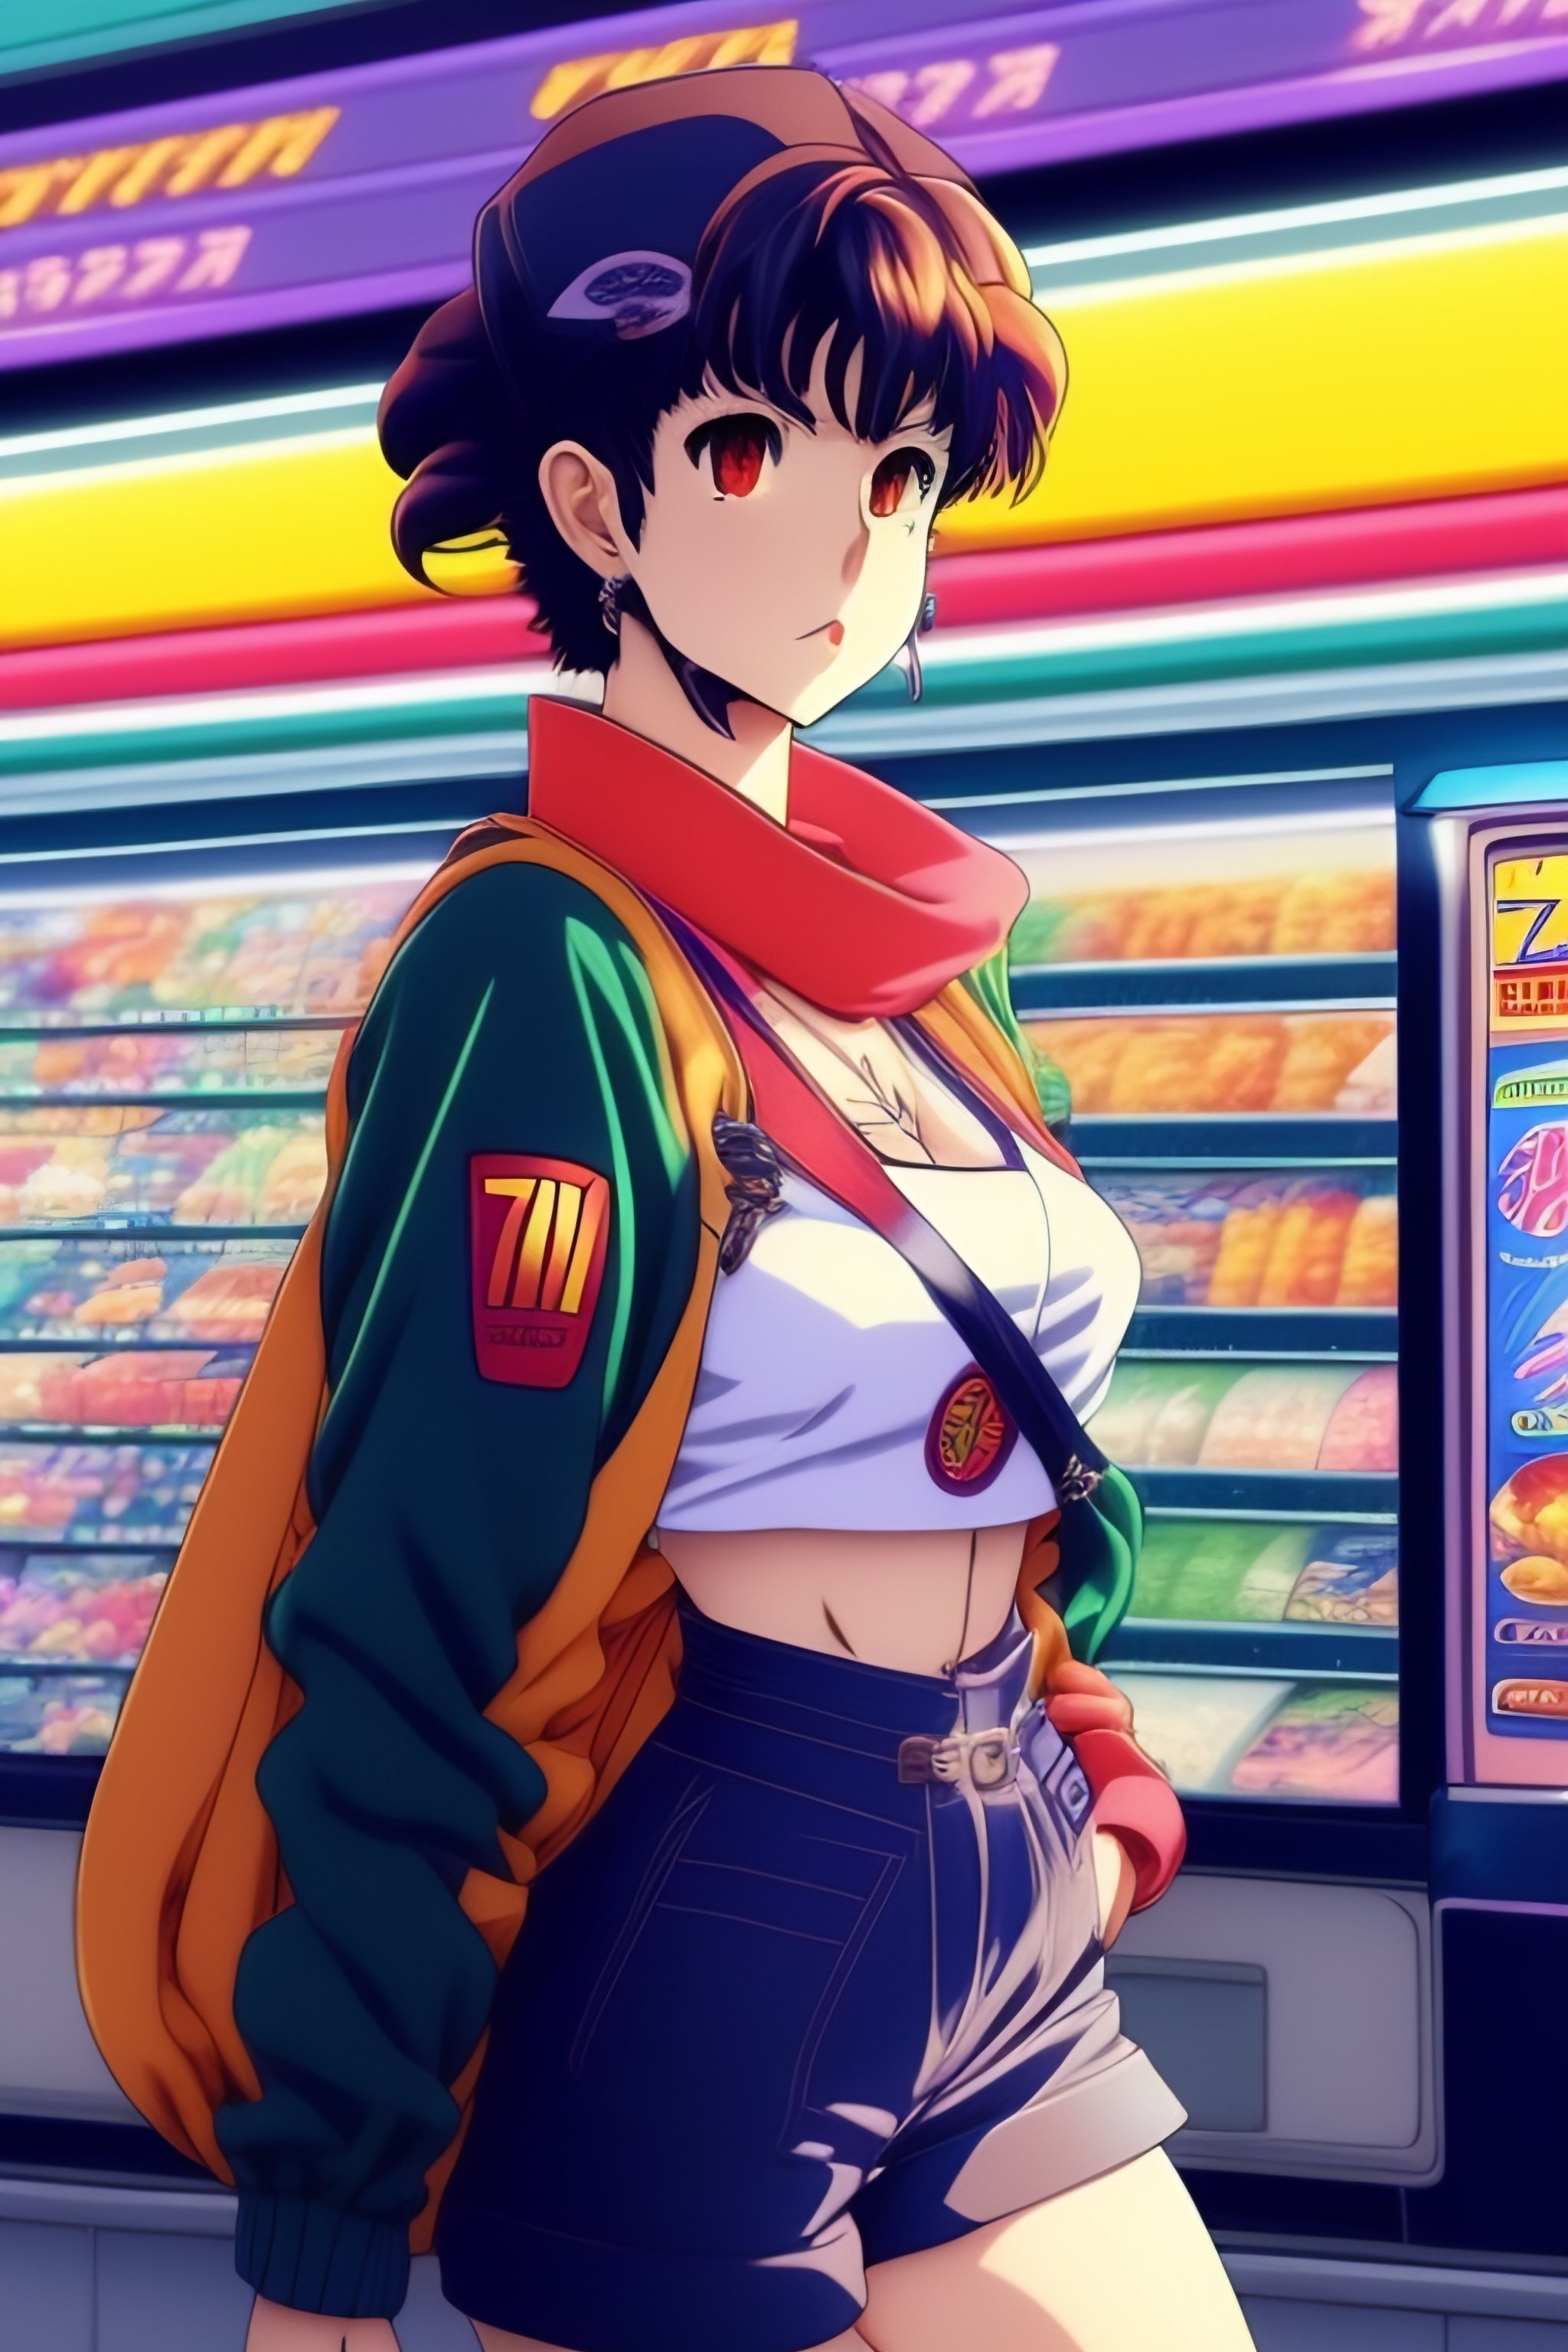 Lexica - Vintage 90's anime style. stylish model in 7/11 convenience ...